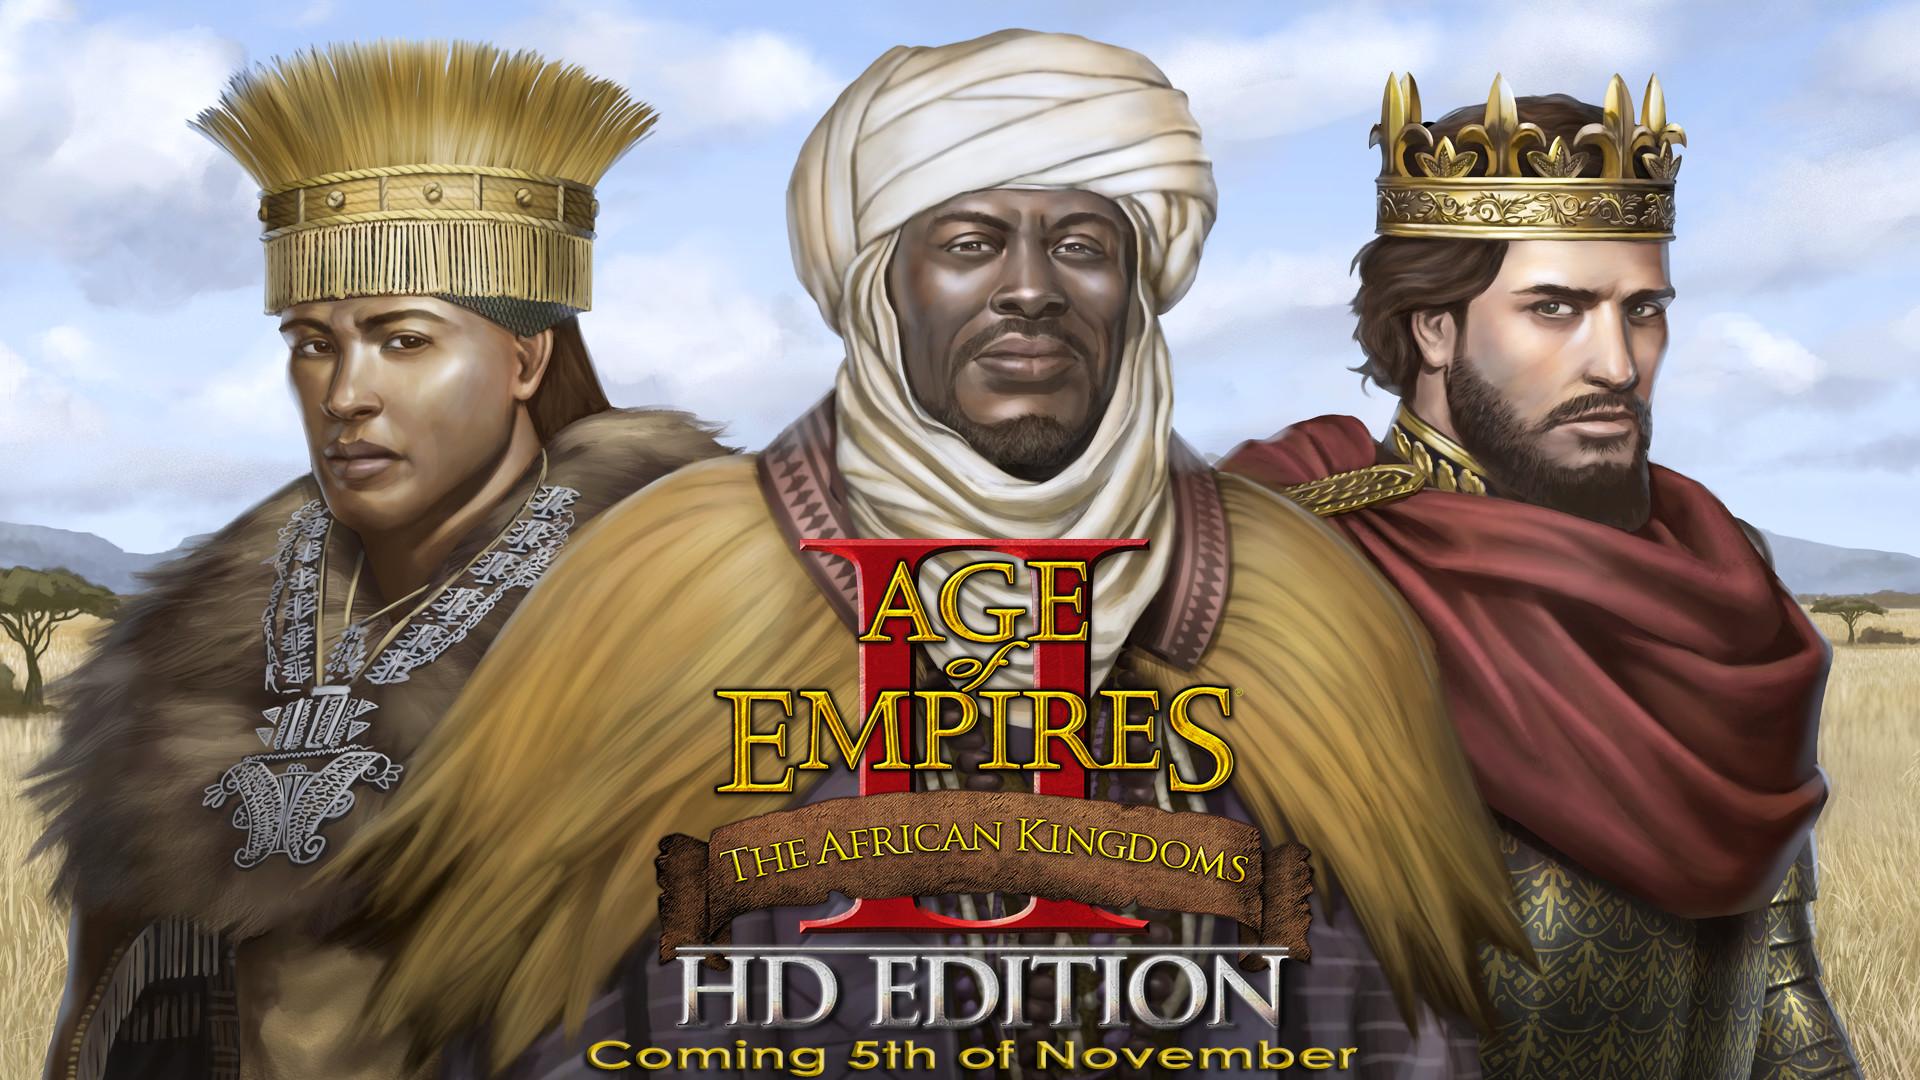 age of empires 2 hd definitive edition download